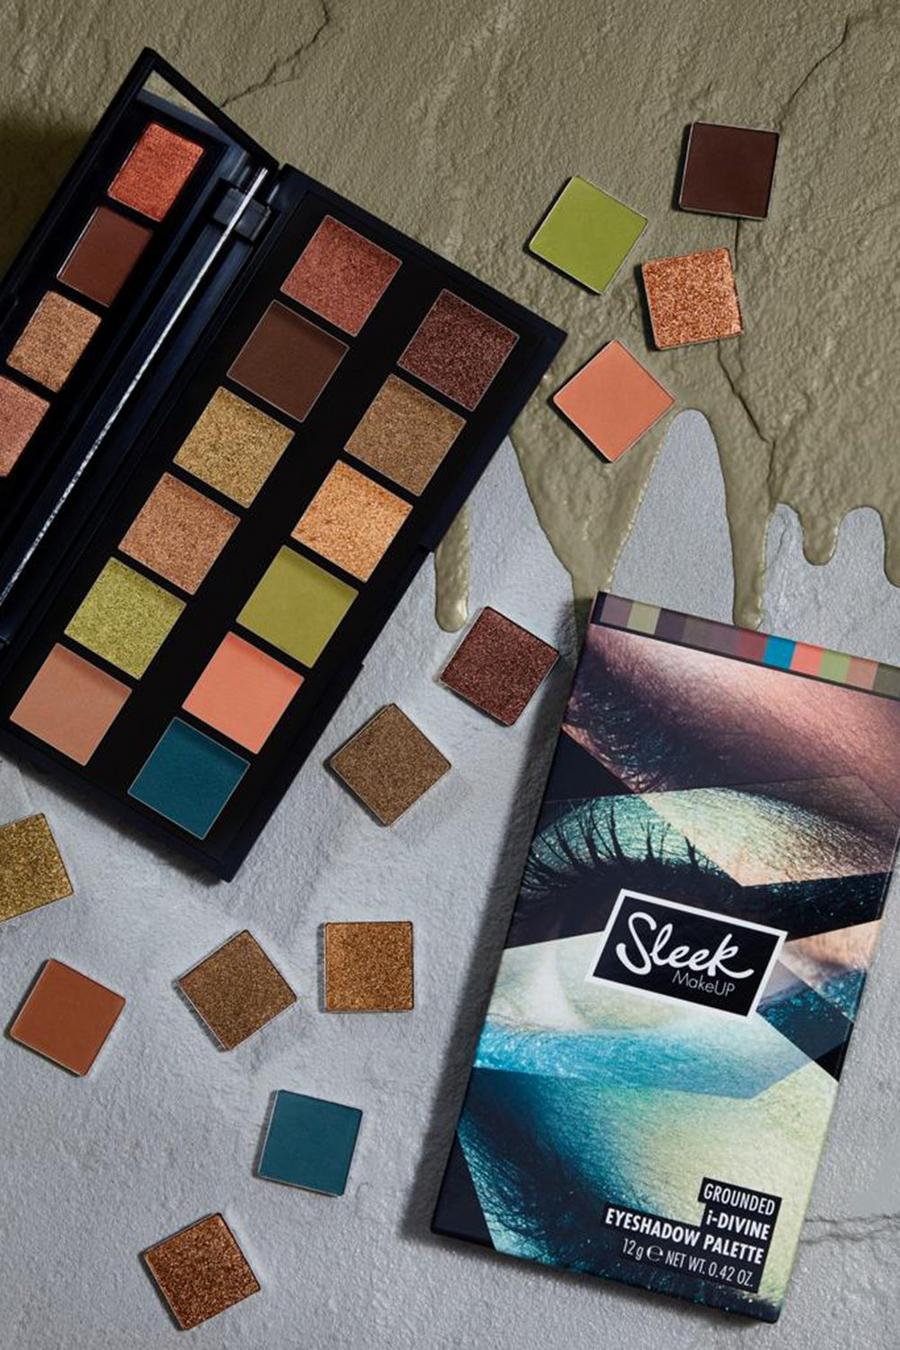 Sleek i-Divine Eyeshadow Palette Grounded - palette di ombretti, Multi image number 1